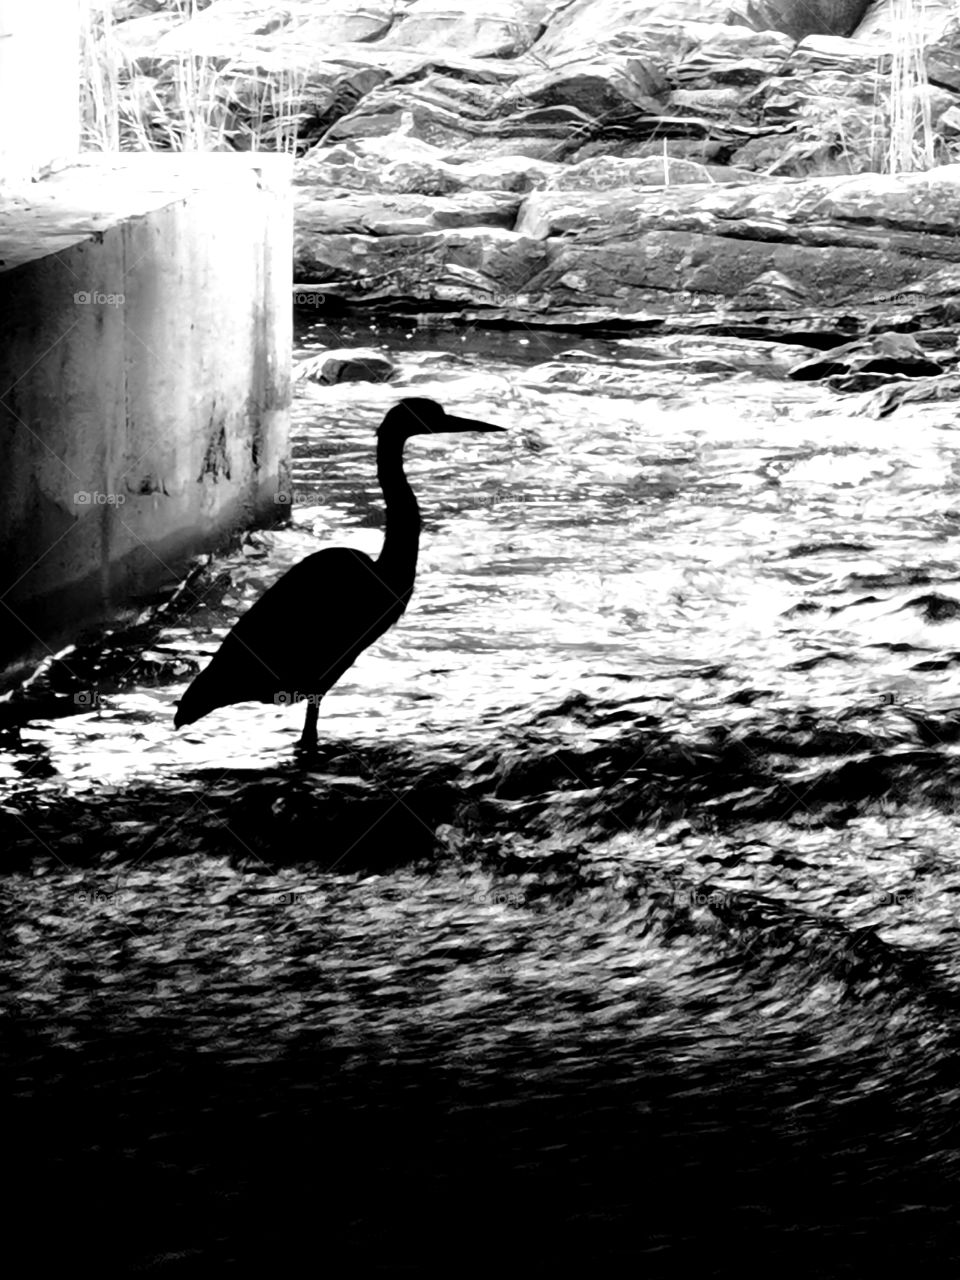 A stork, hiding in the shadows, under a bridge, awaiting for fish to swim by. Water rapids are fast but the stork remains still.